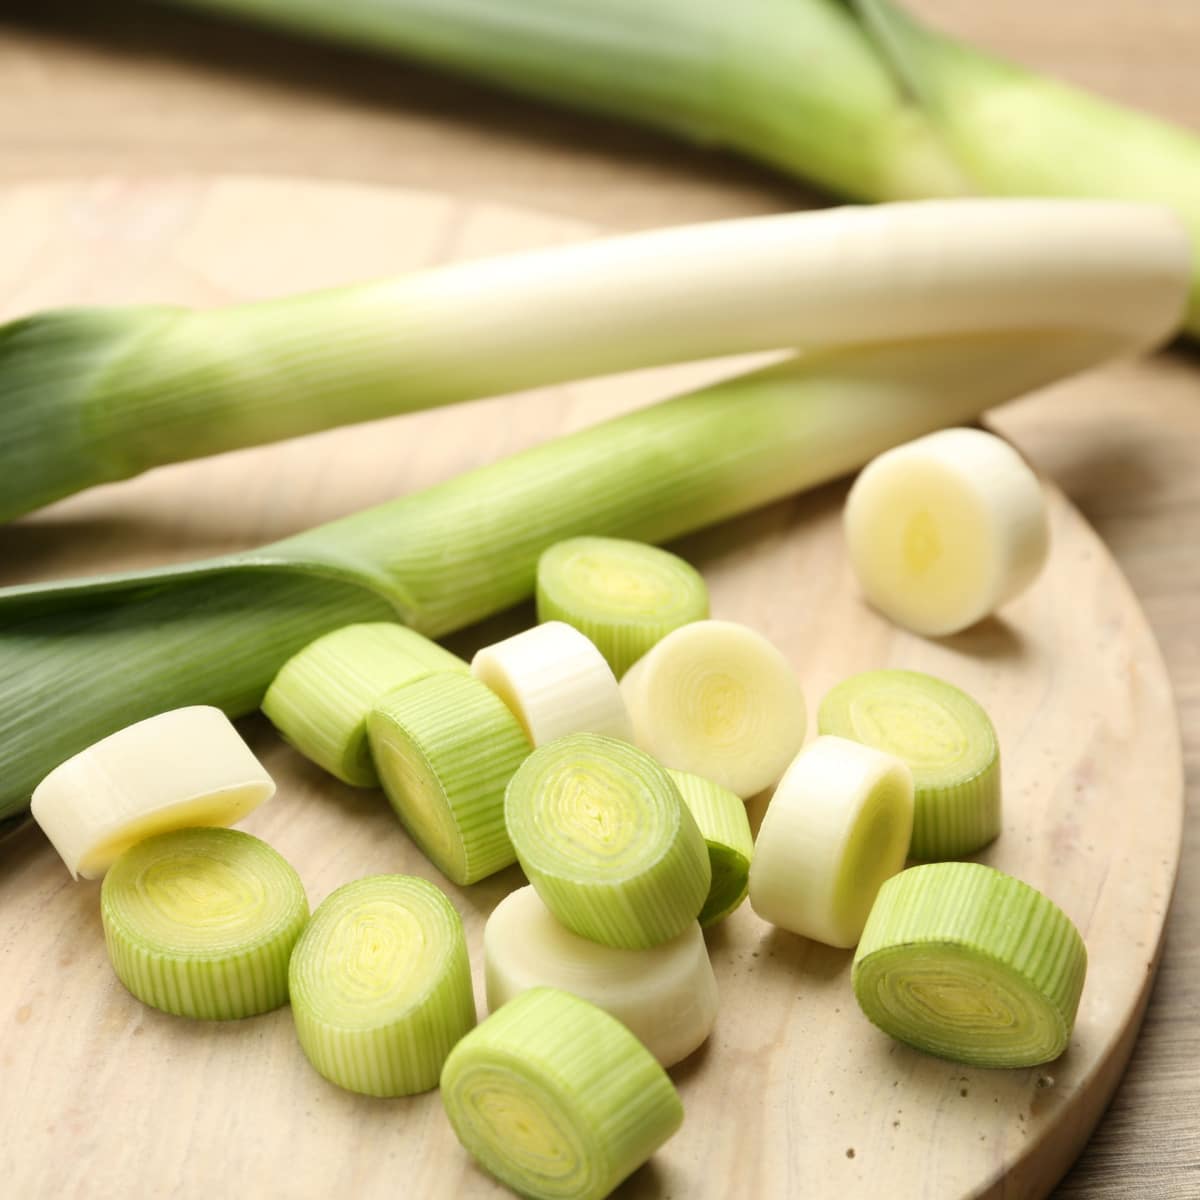 Whole and Slice Onion Leeks on a Wooden Cutting Board